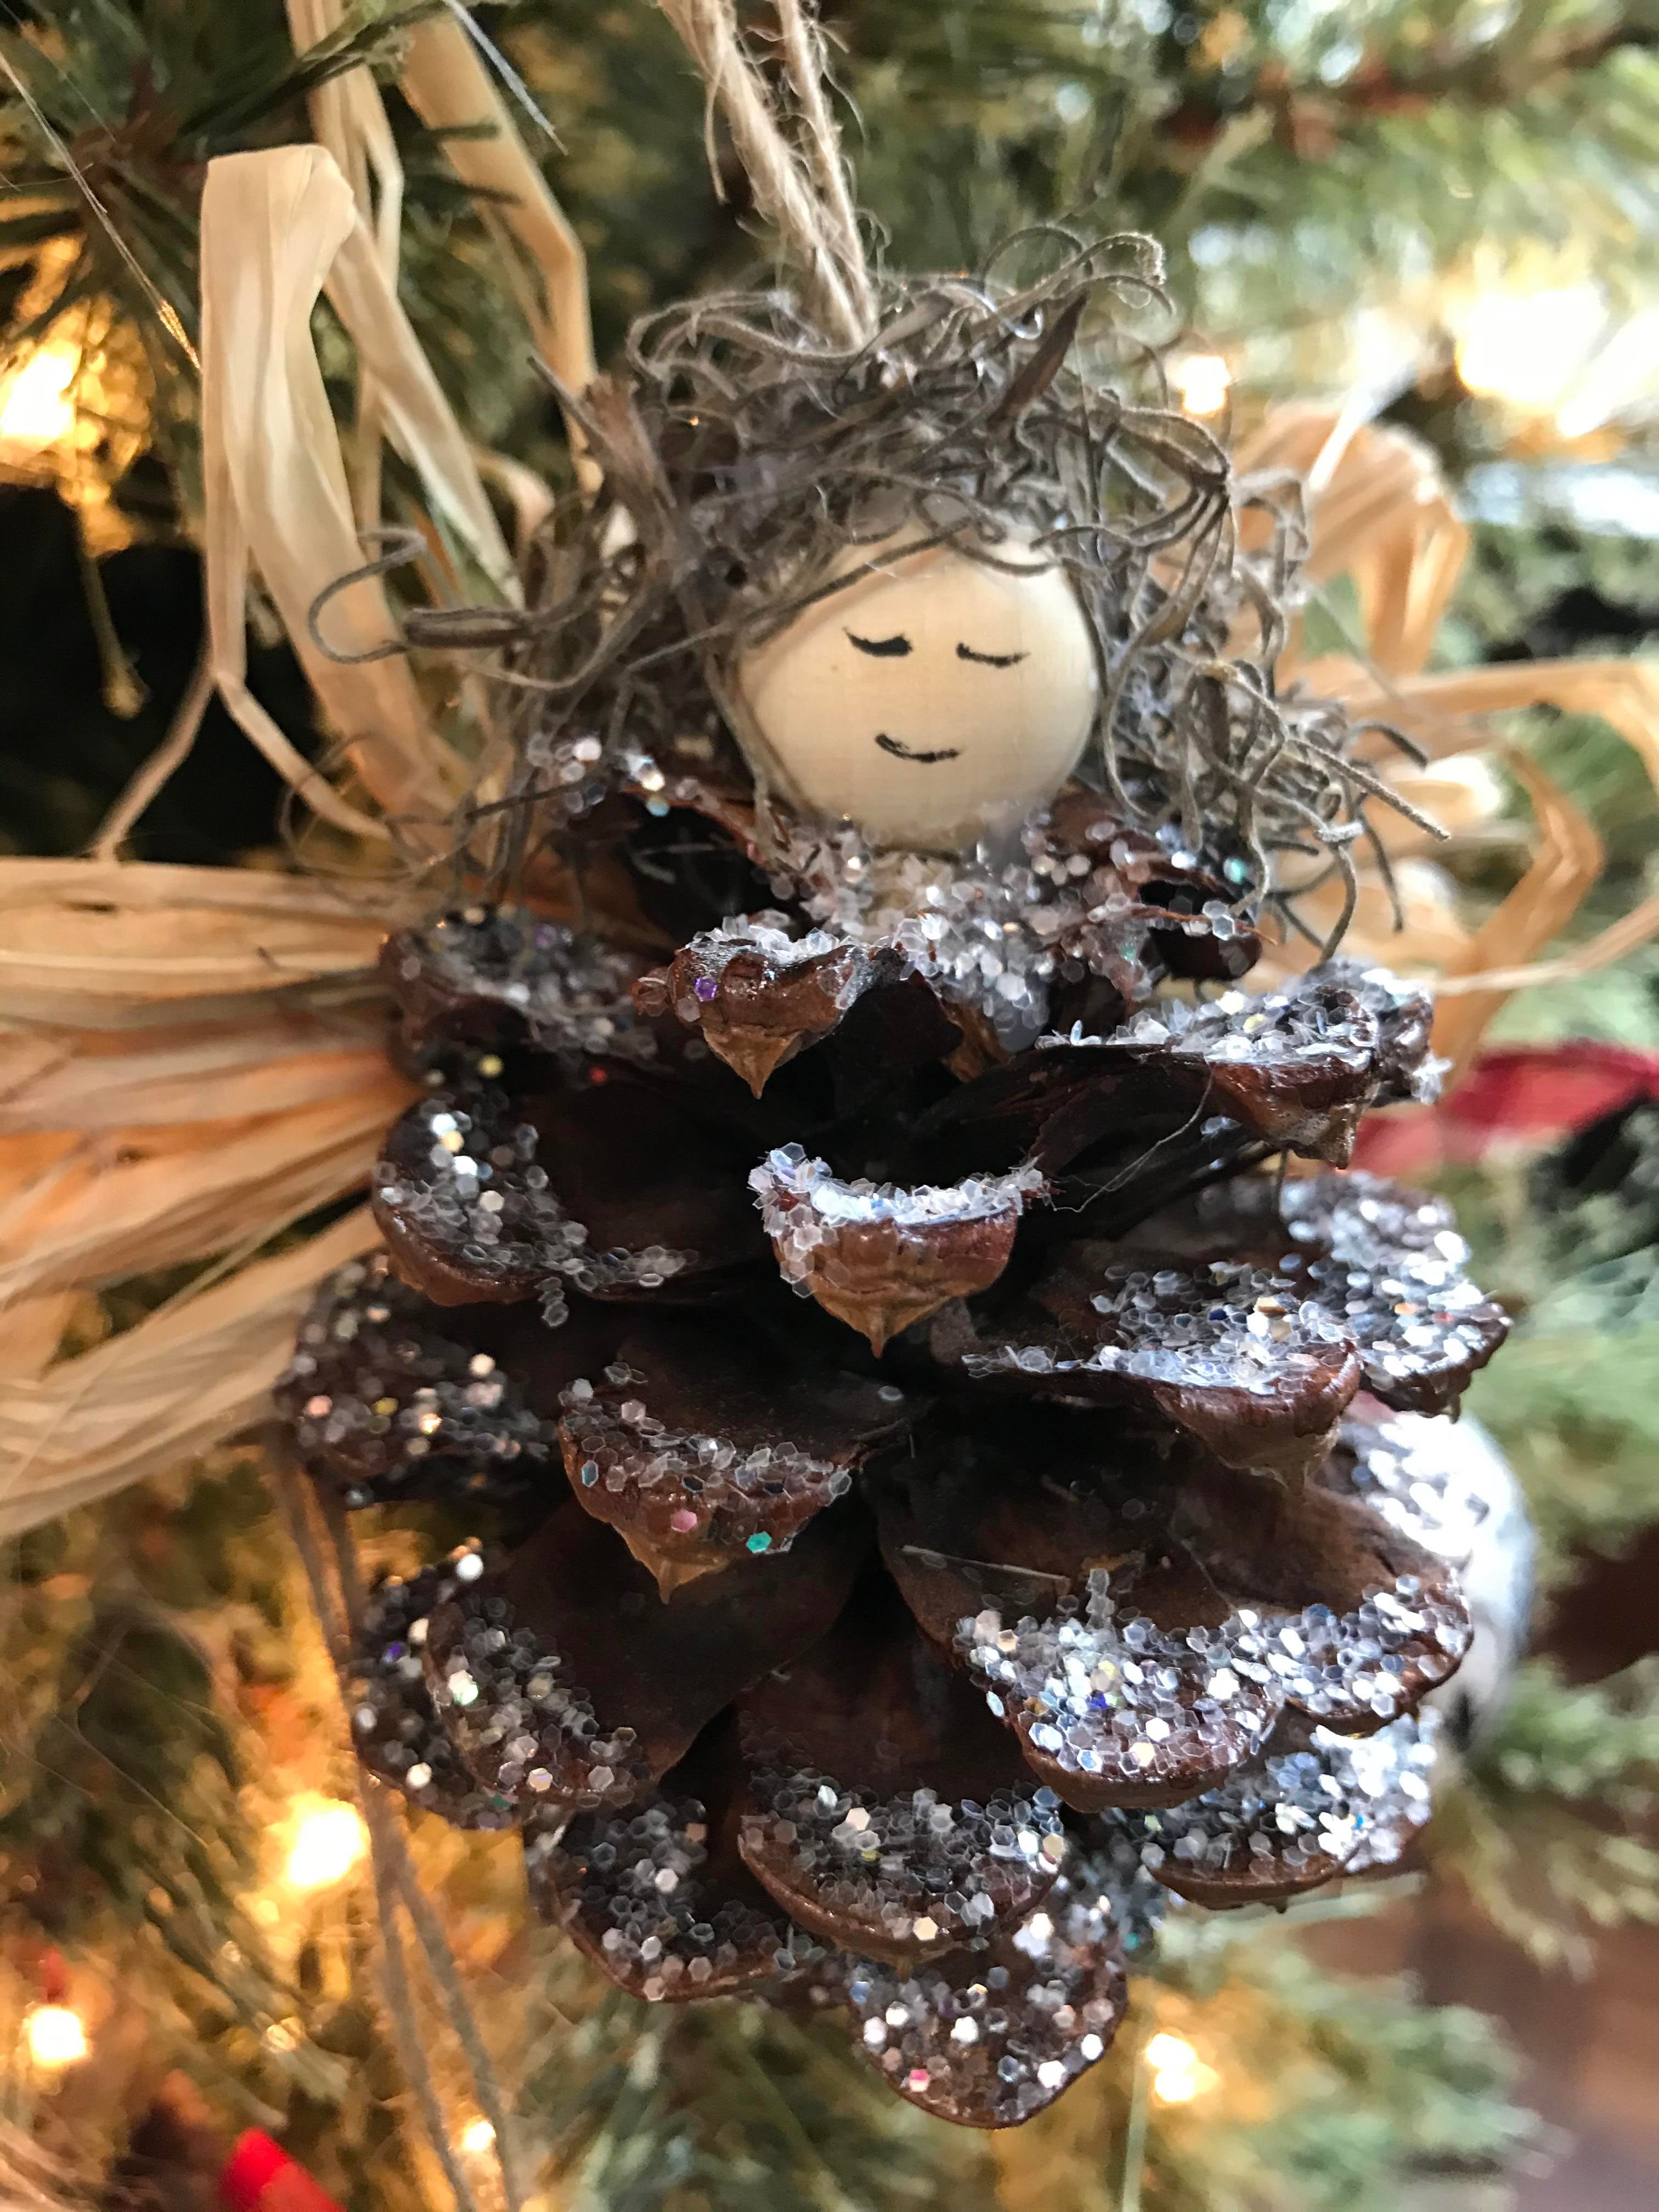 Pine Cone Ornaments Angel Wings, Holiday Ornaments, Christmas Decorations,  Gift Ornaments – CYR'S CREATIONS